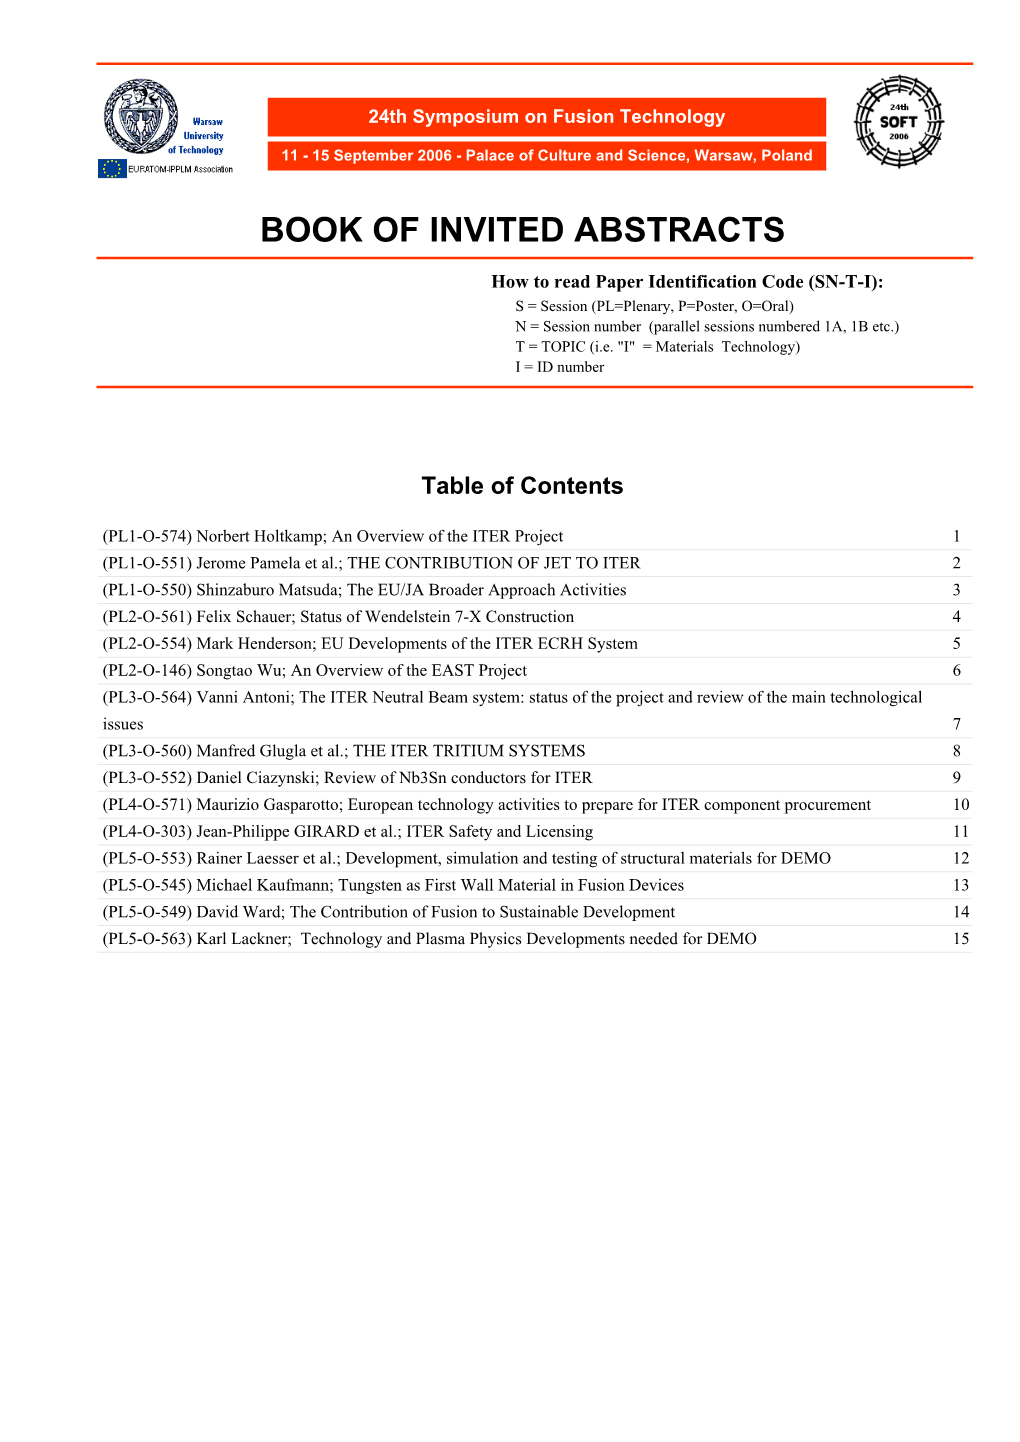 Book of Invited Abstracts